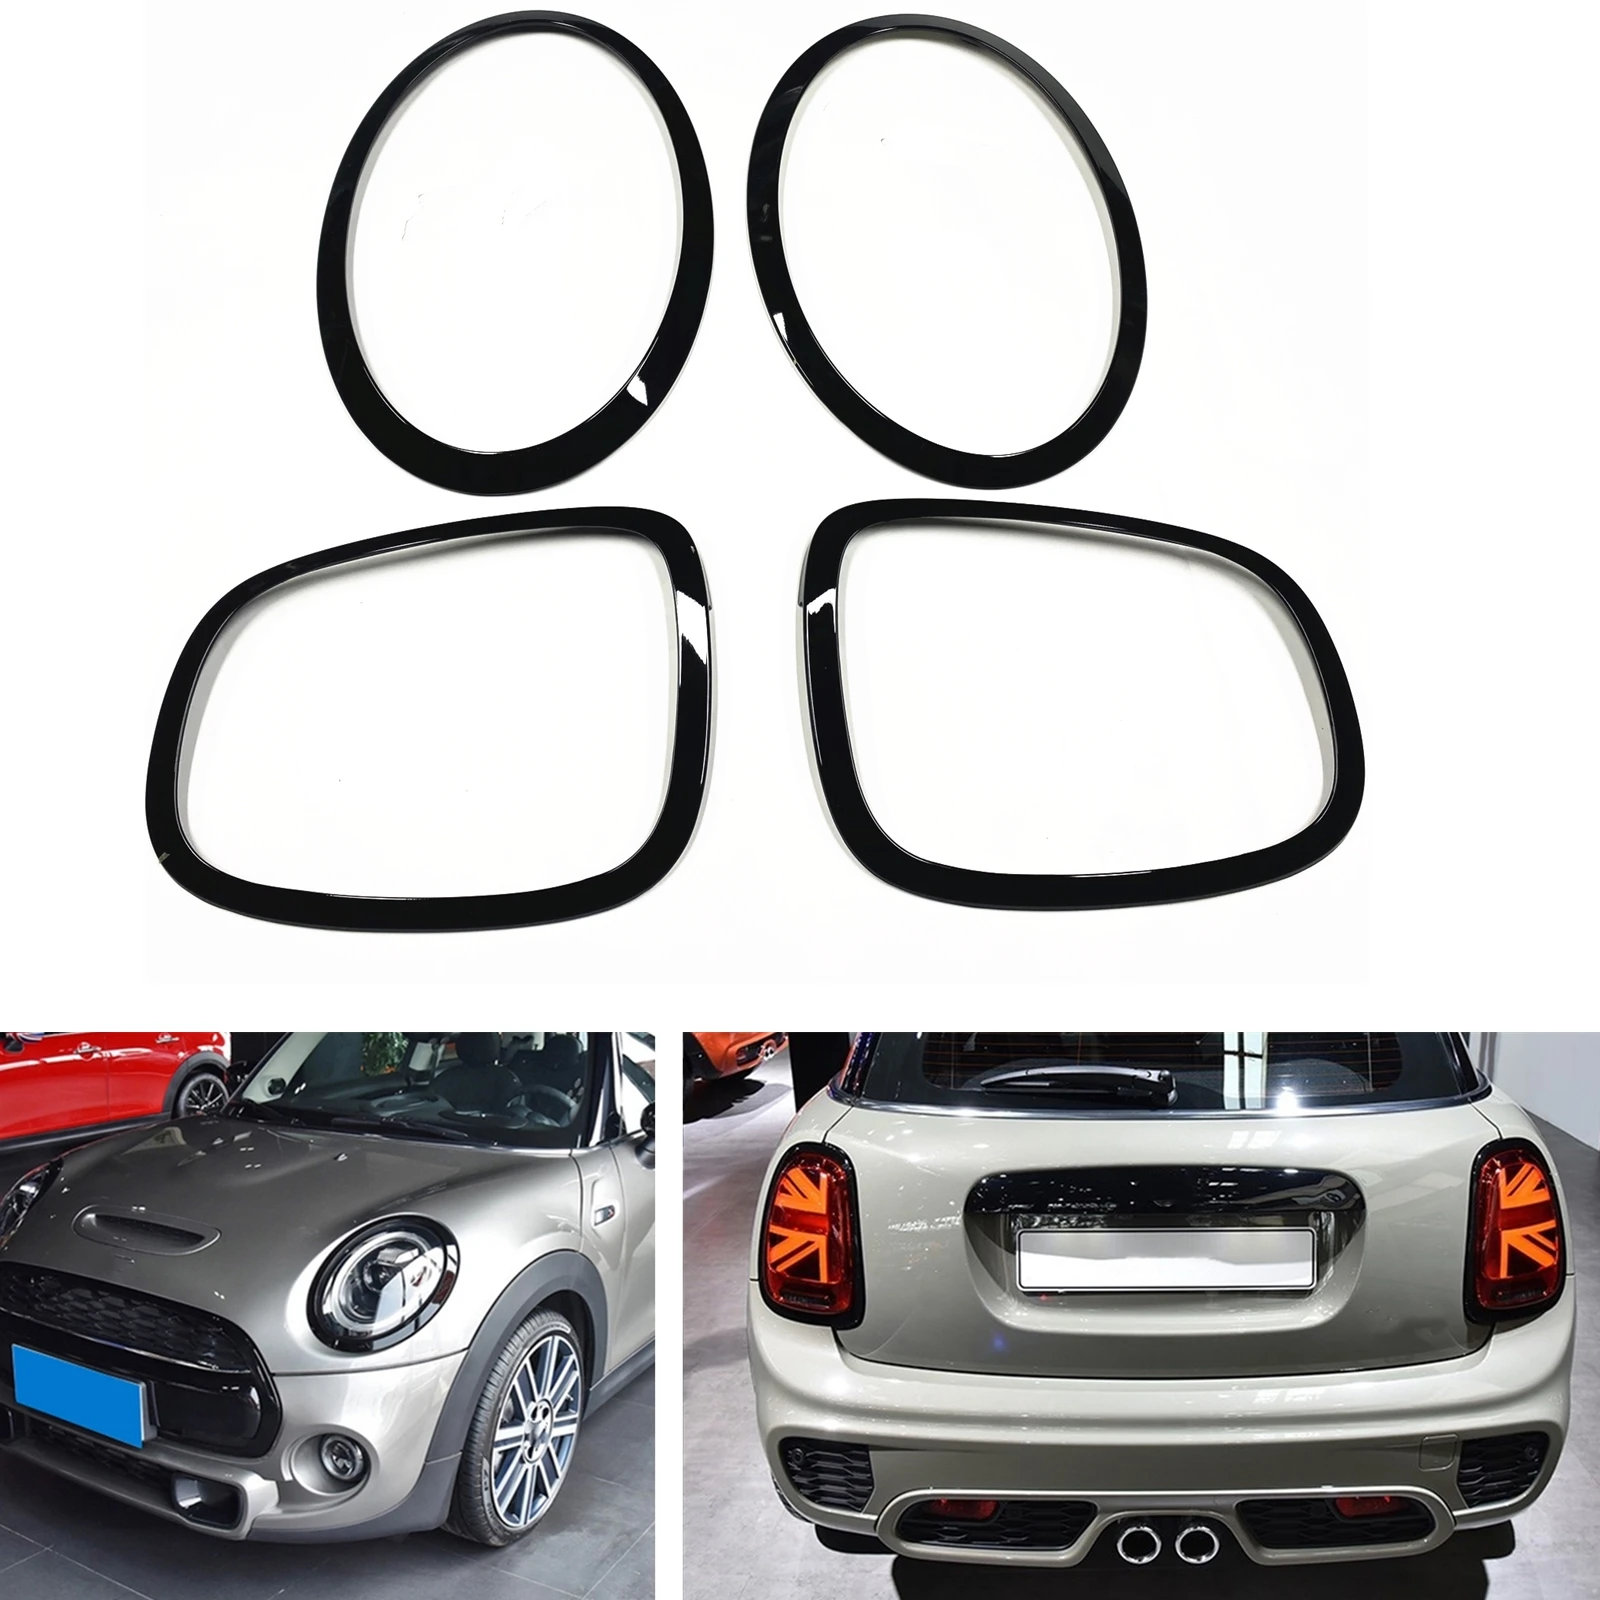 

Front Head Lamp+Rear Light Cover Frame For BMW Mini Cooper S F55 F56 F57 JCW 2014-UP Headlight Headlamp Replacement Type Trim